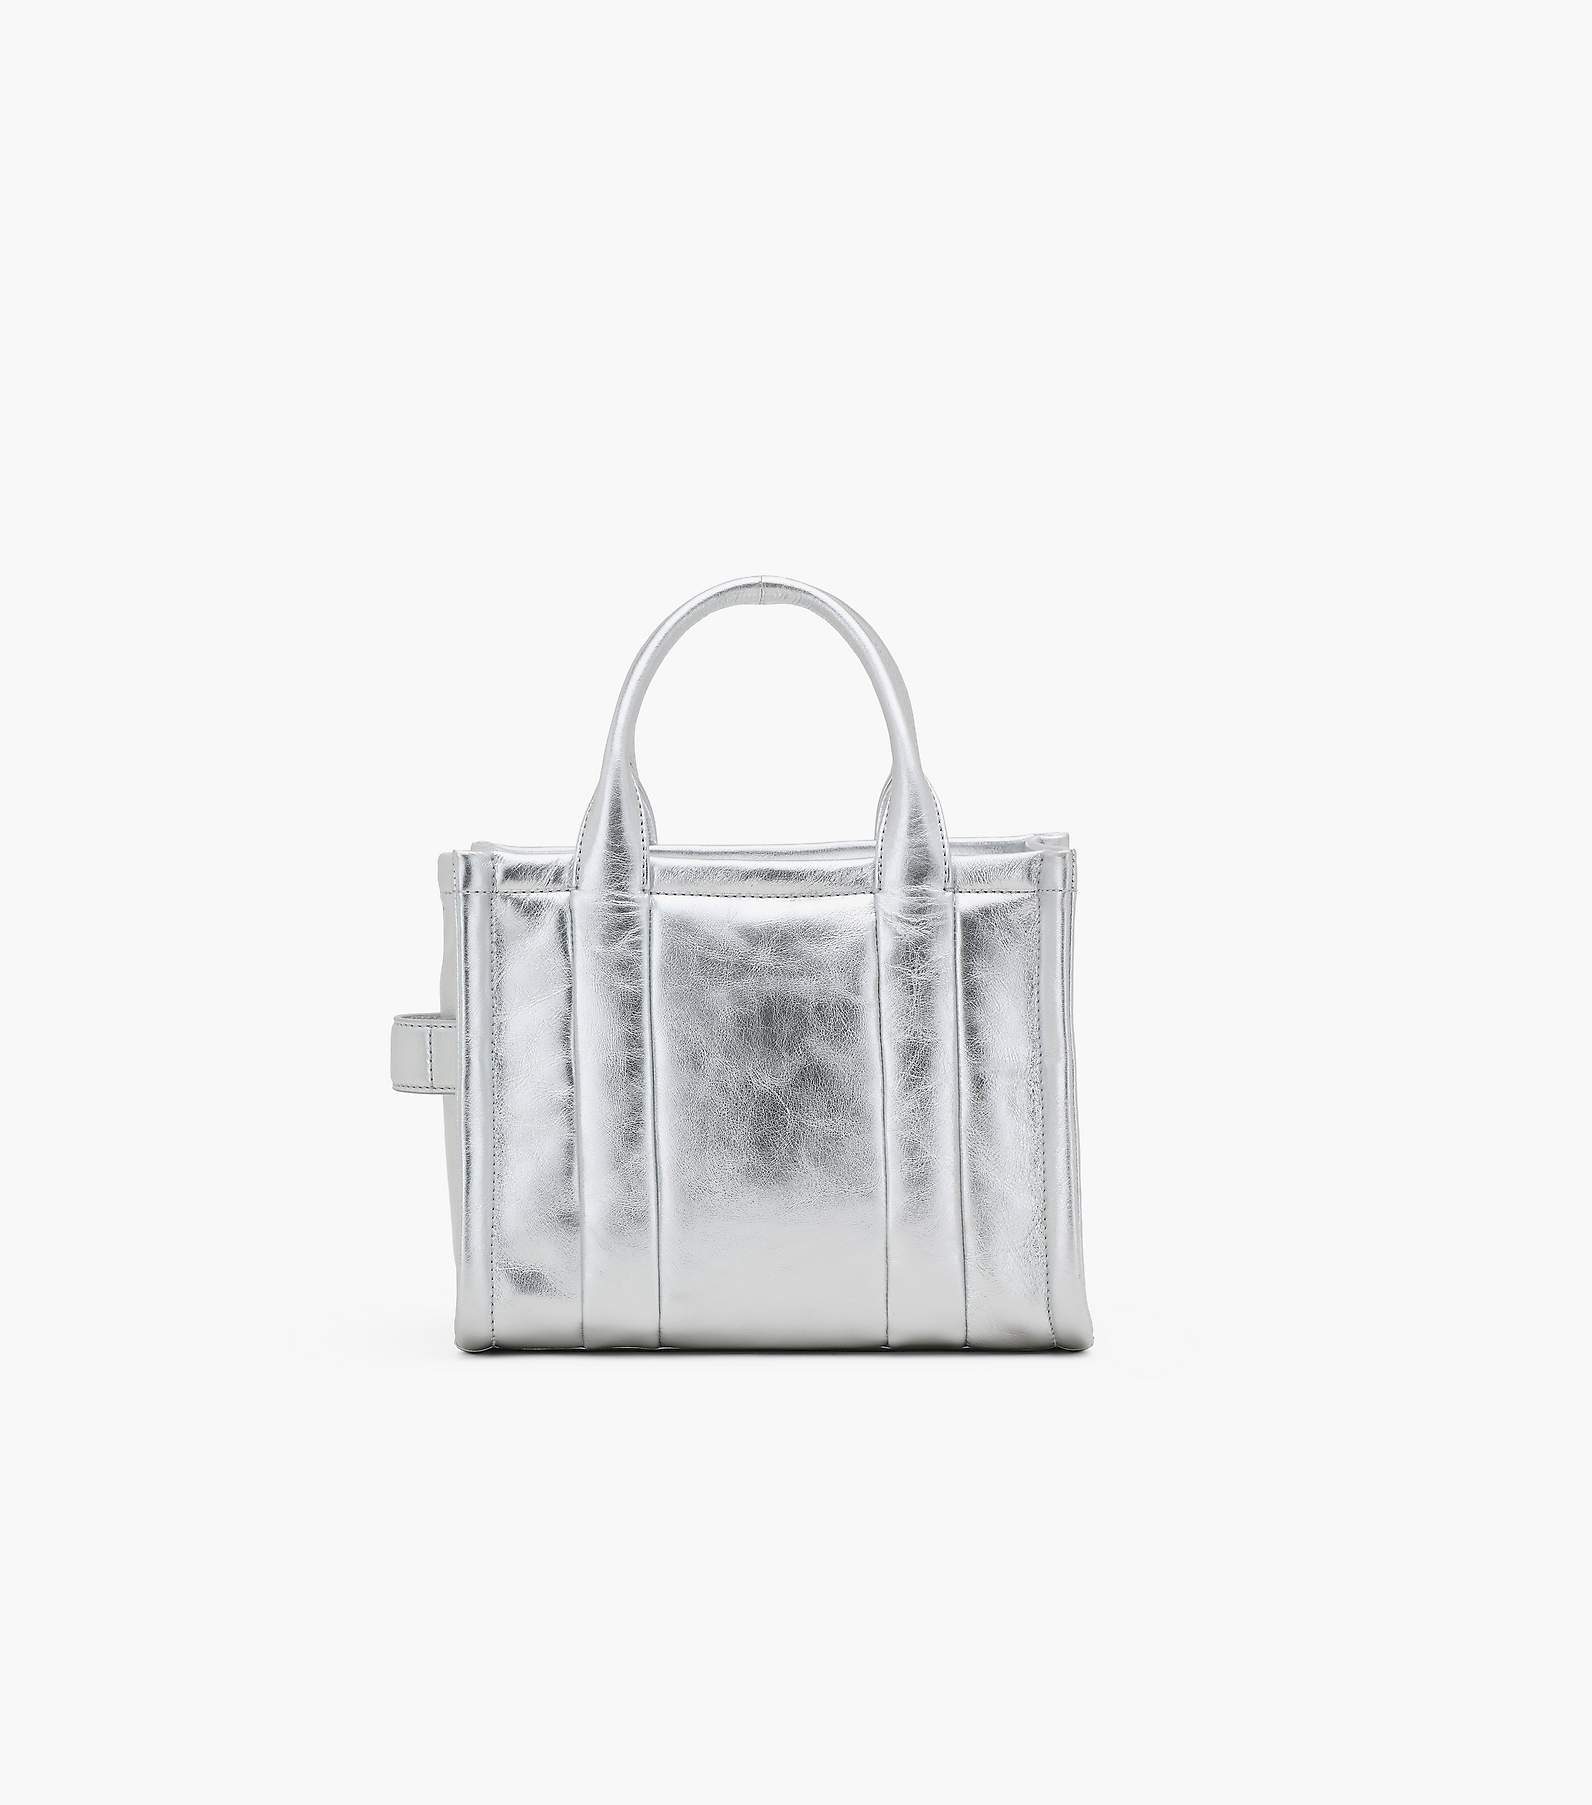 The Metallic Leather Small Tote Bag, Marc Jacobs